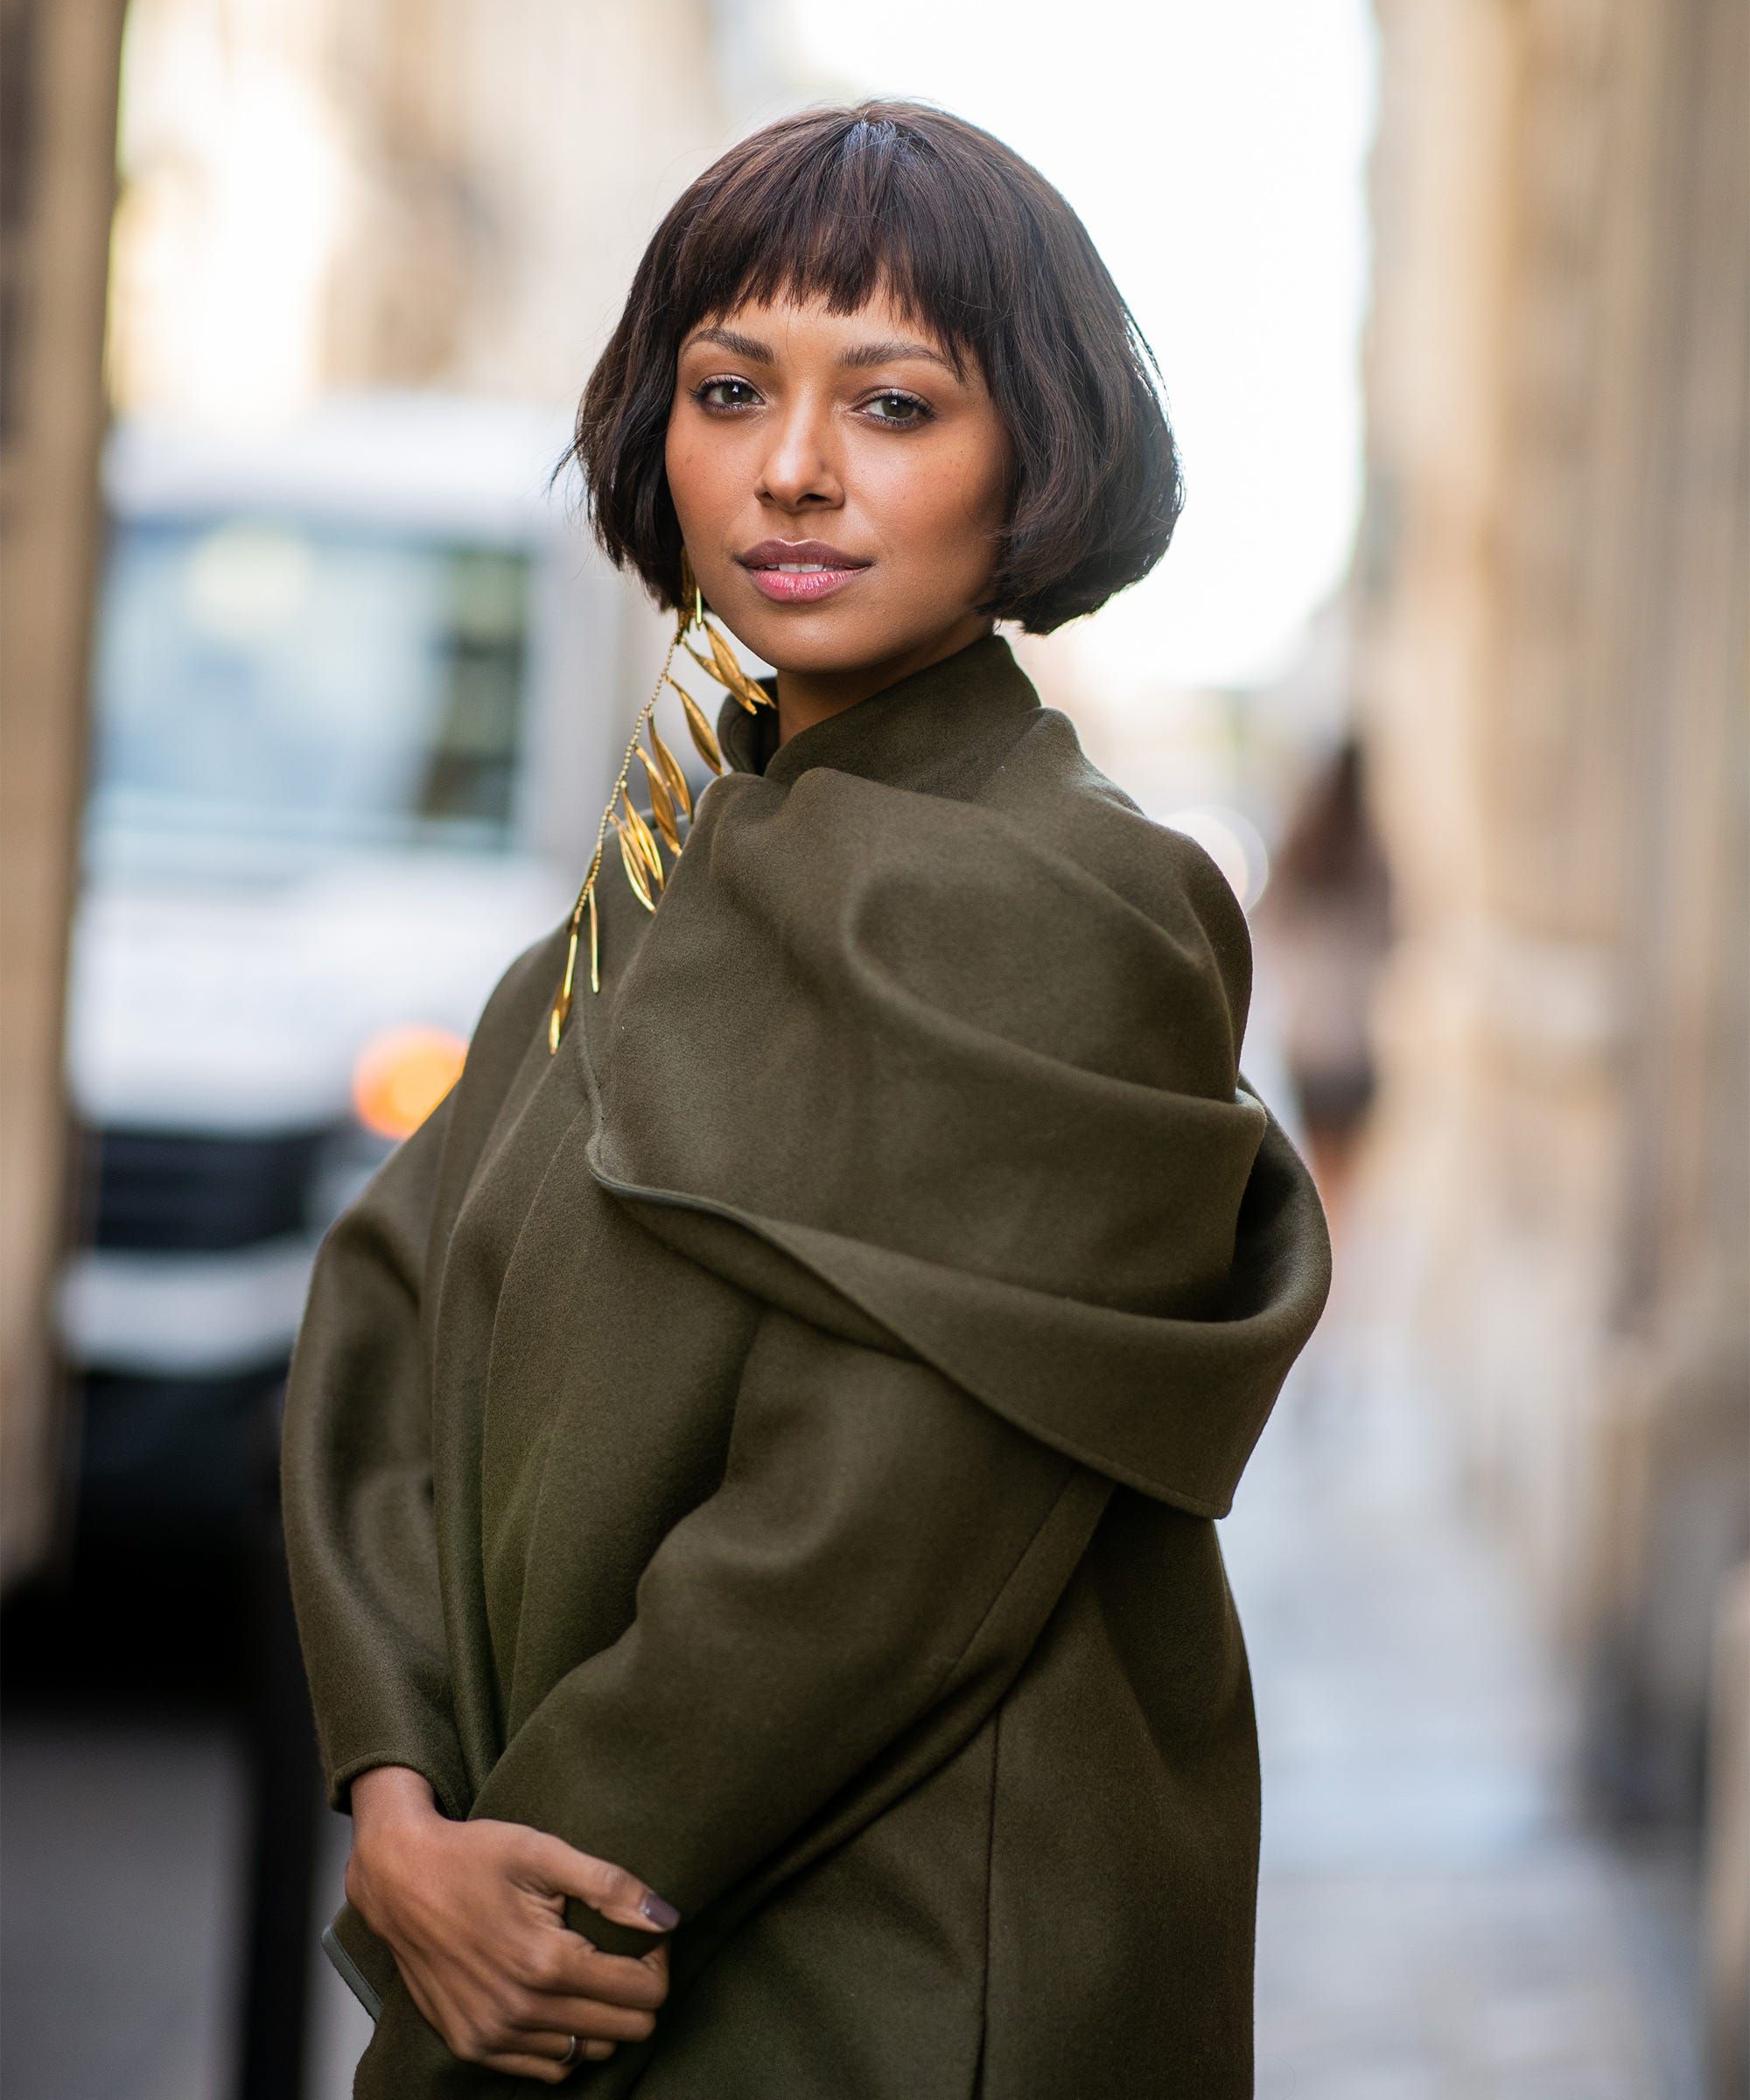 The Best Bob Haircuts You Need To Try For Fall 2019 Throughout Short Bob Hairstyles With Cropped Bangs (Gallery 20 of 20)